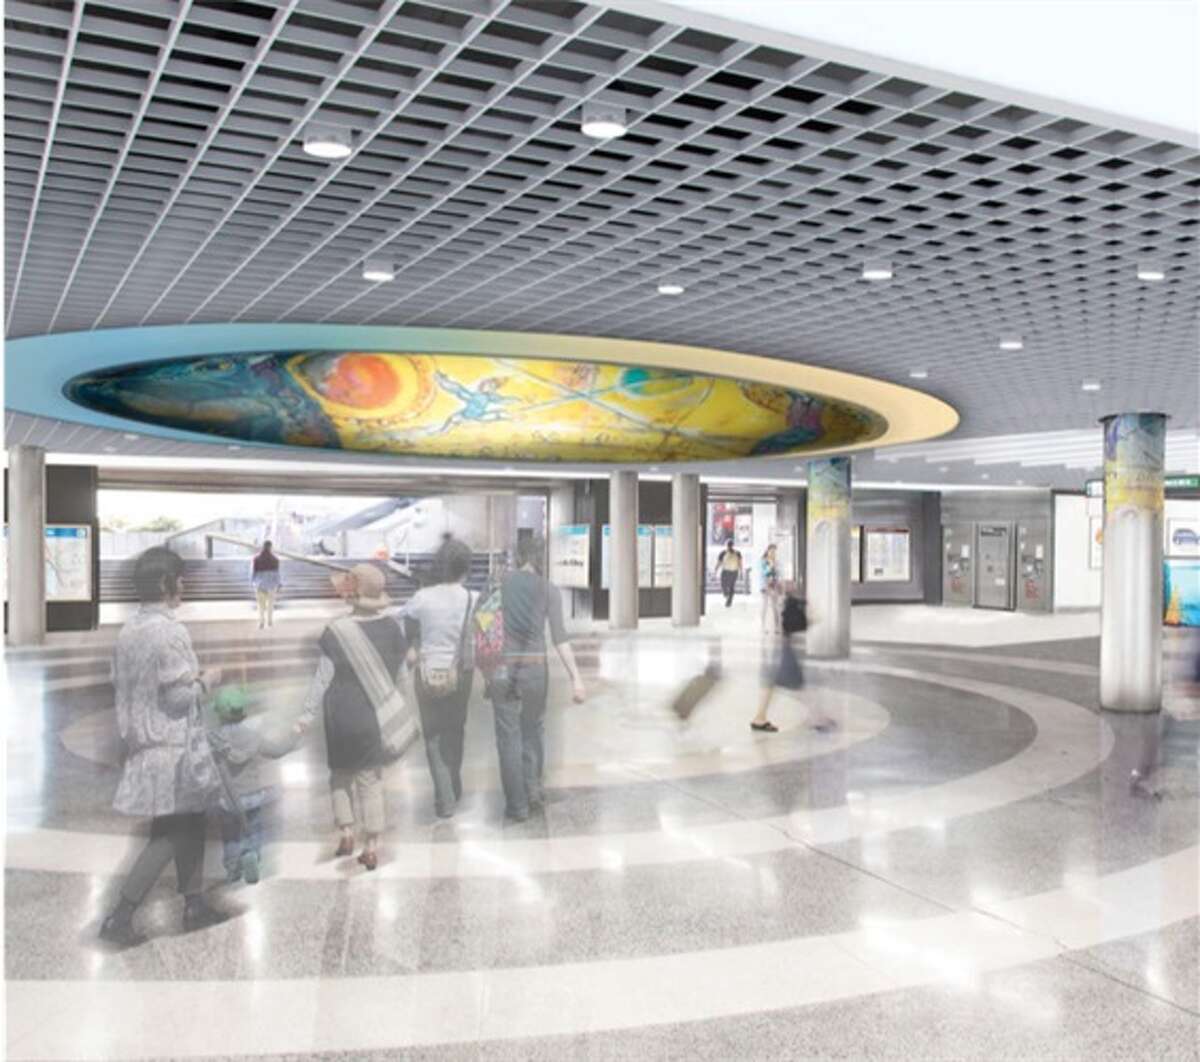 Powell Street BART Station ceiling concept. Completion is currently set for Fall/Winter 2019.